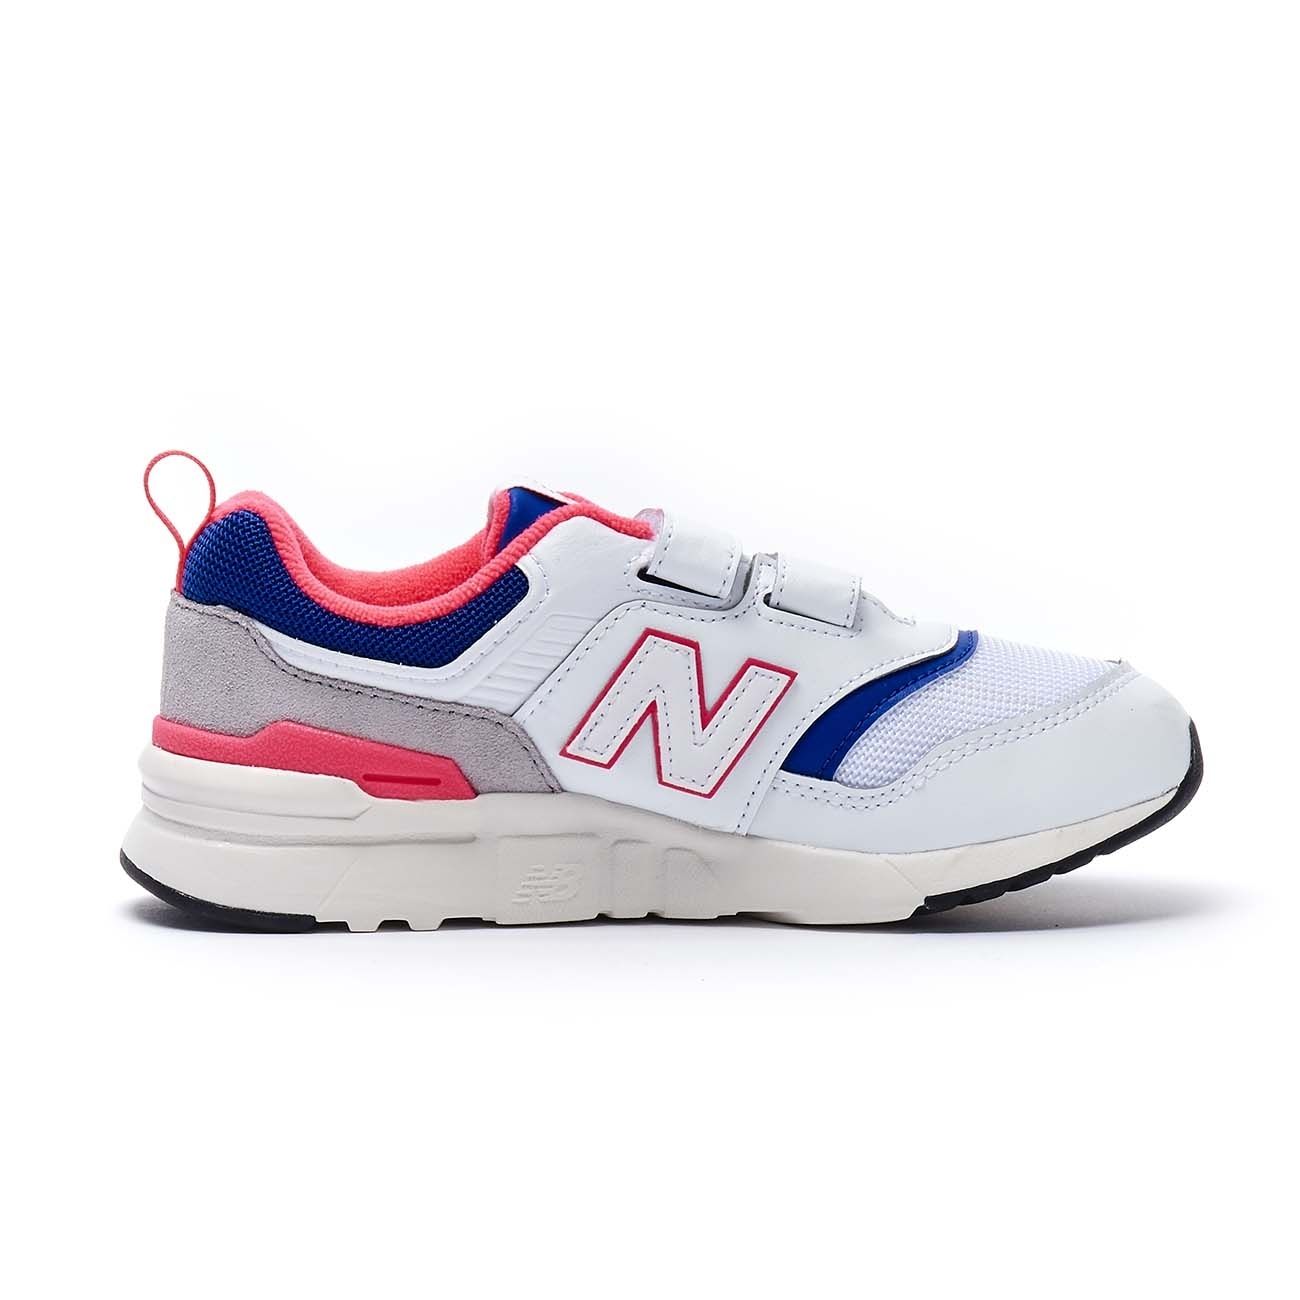 new balance sneakers 997h